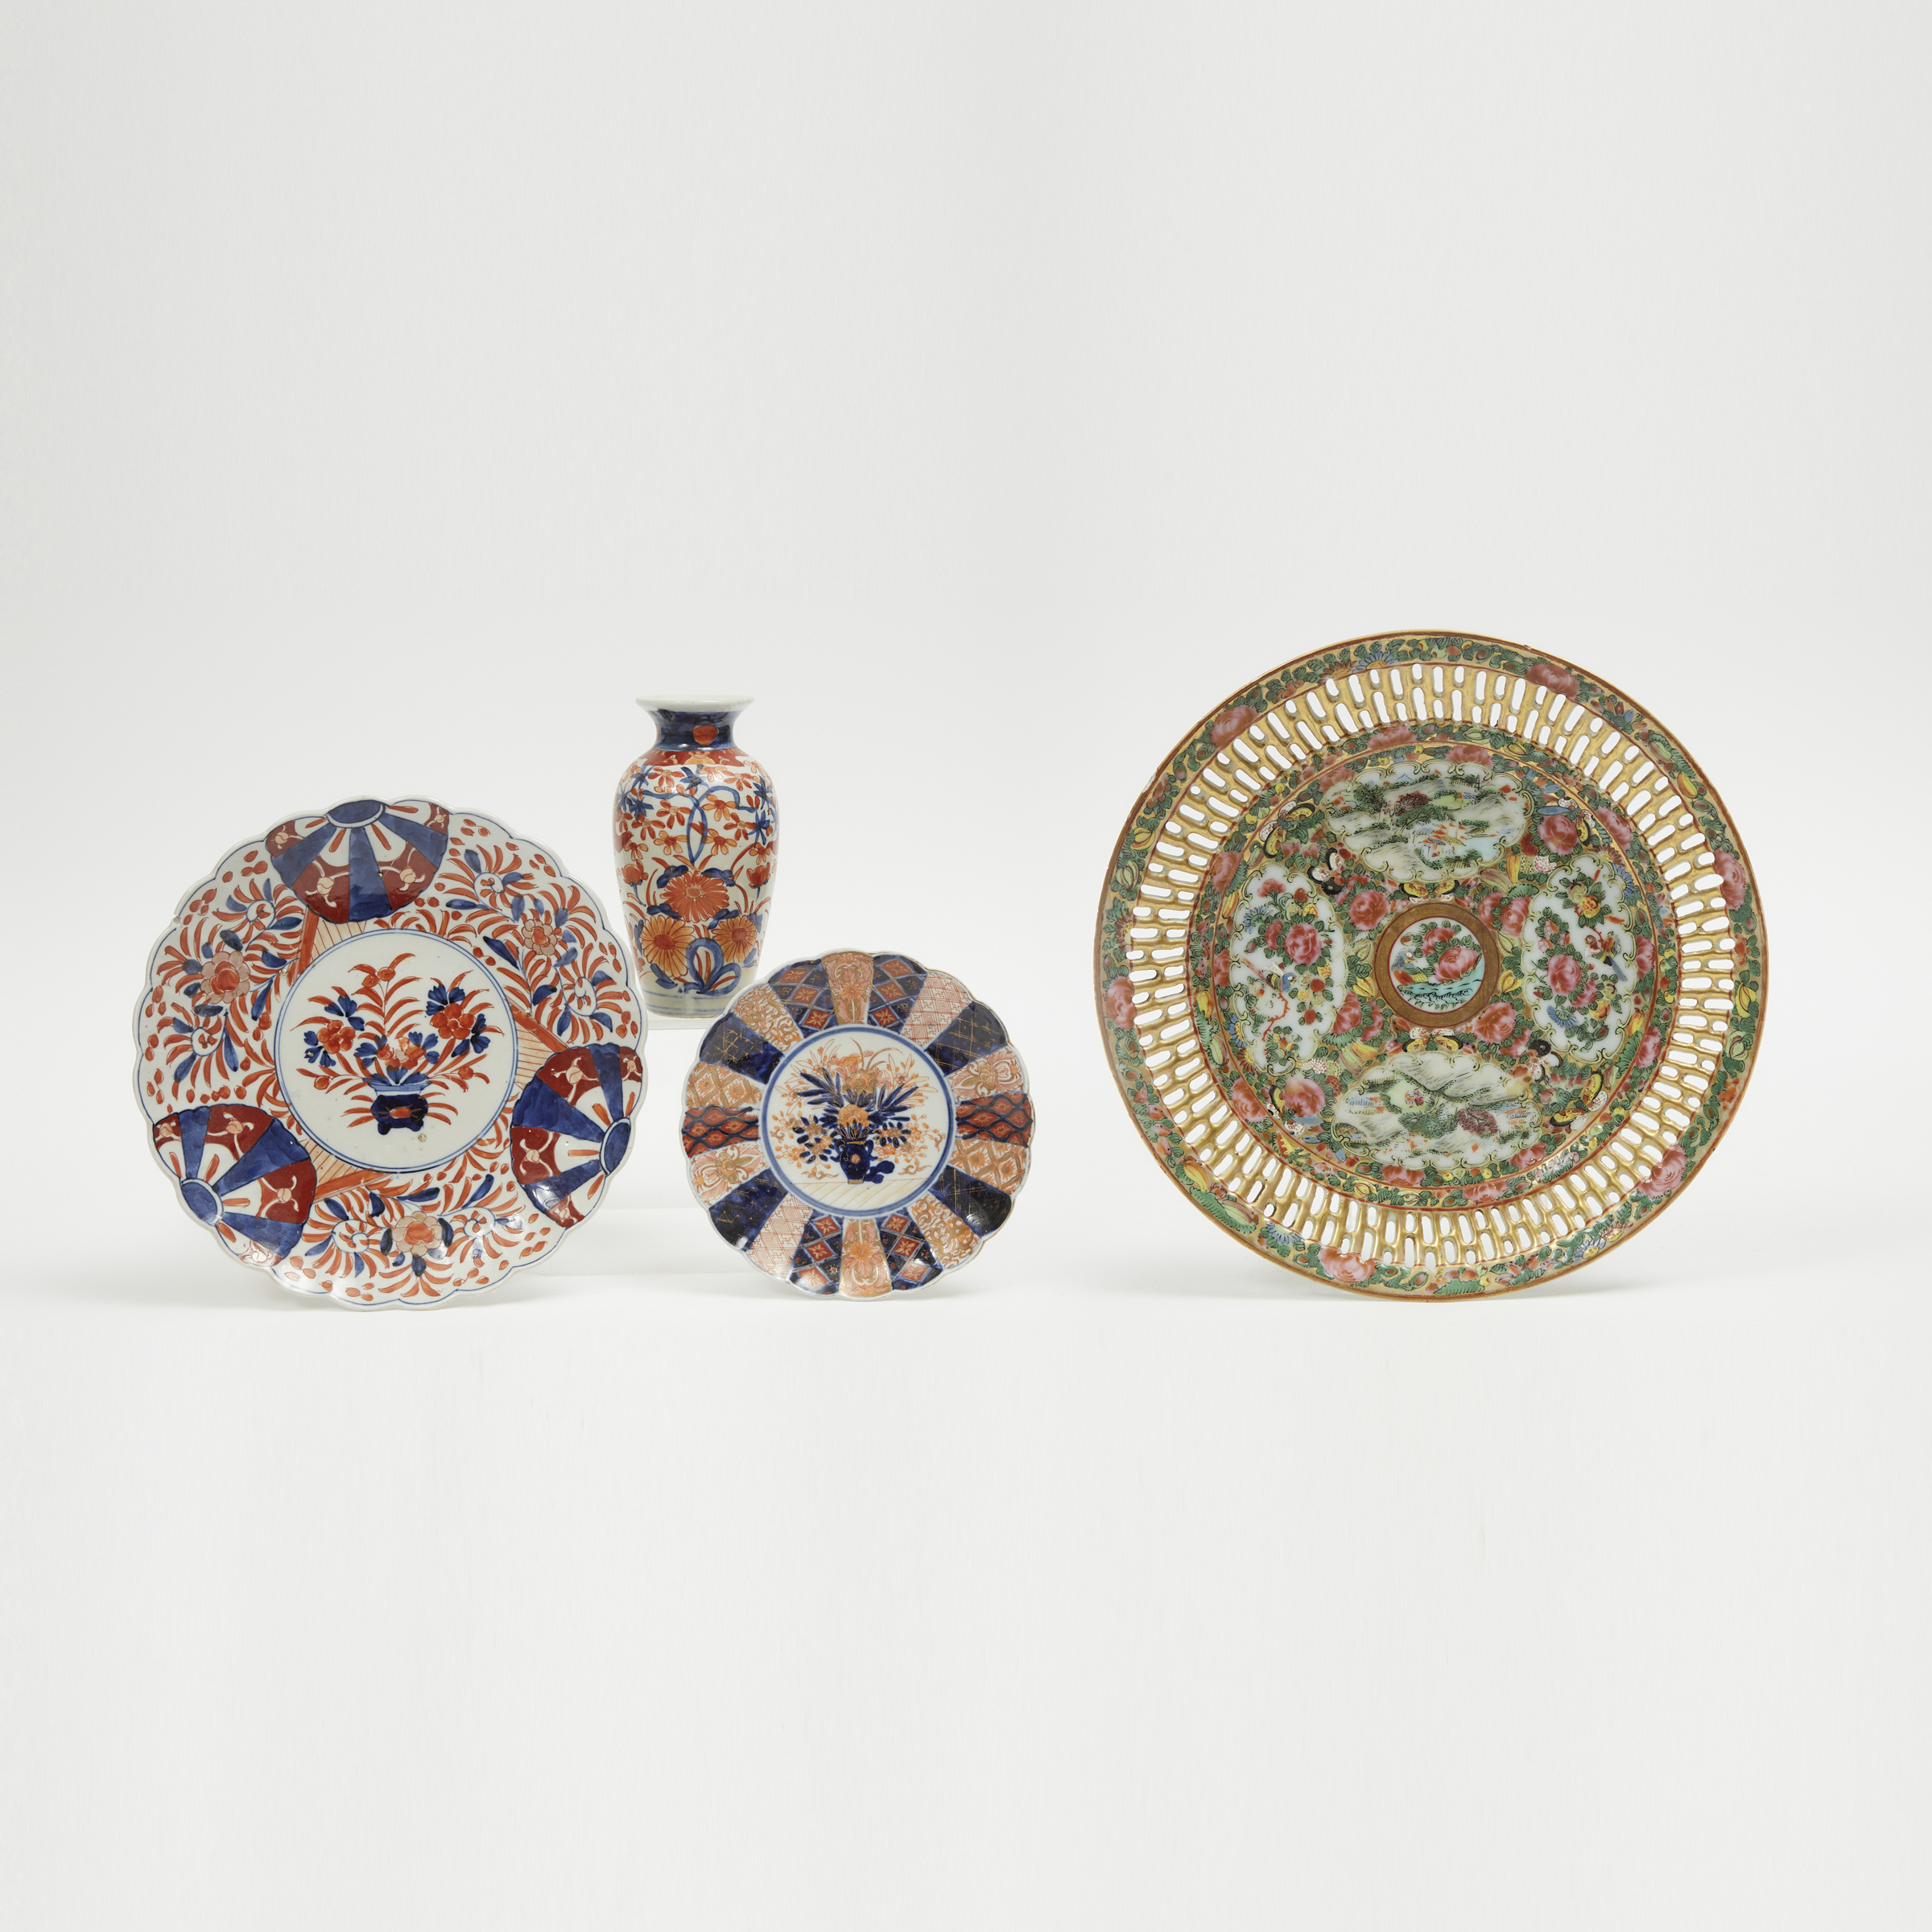 A Group of Three Imari Wares and One Canton Famille Rose Dish, 18/19th Century